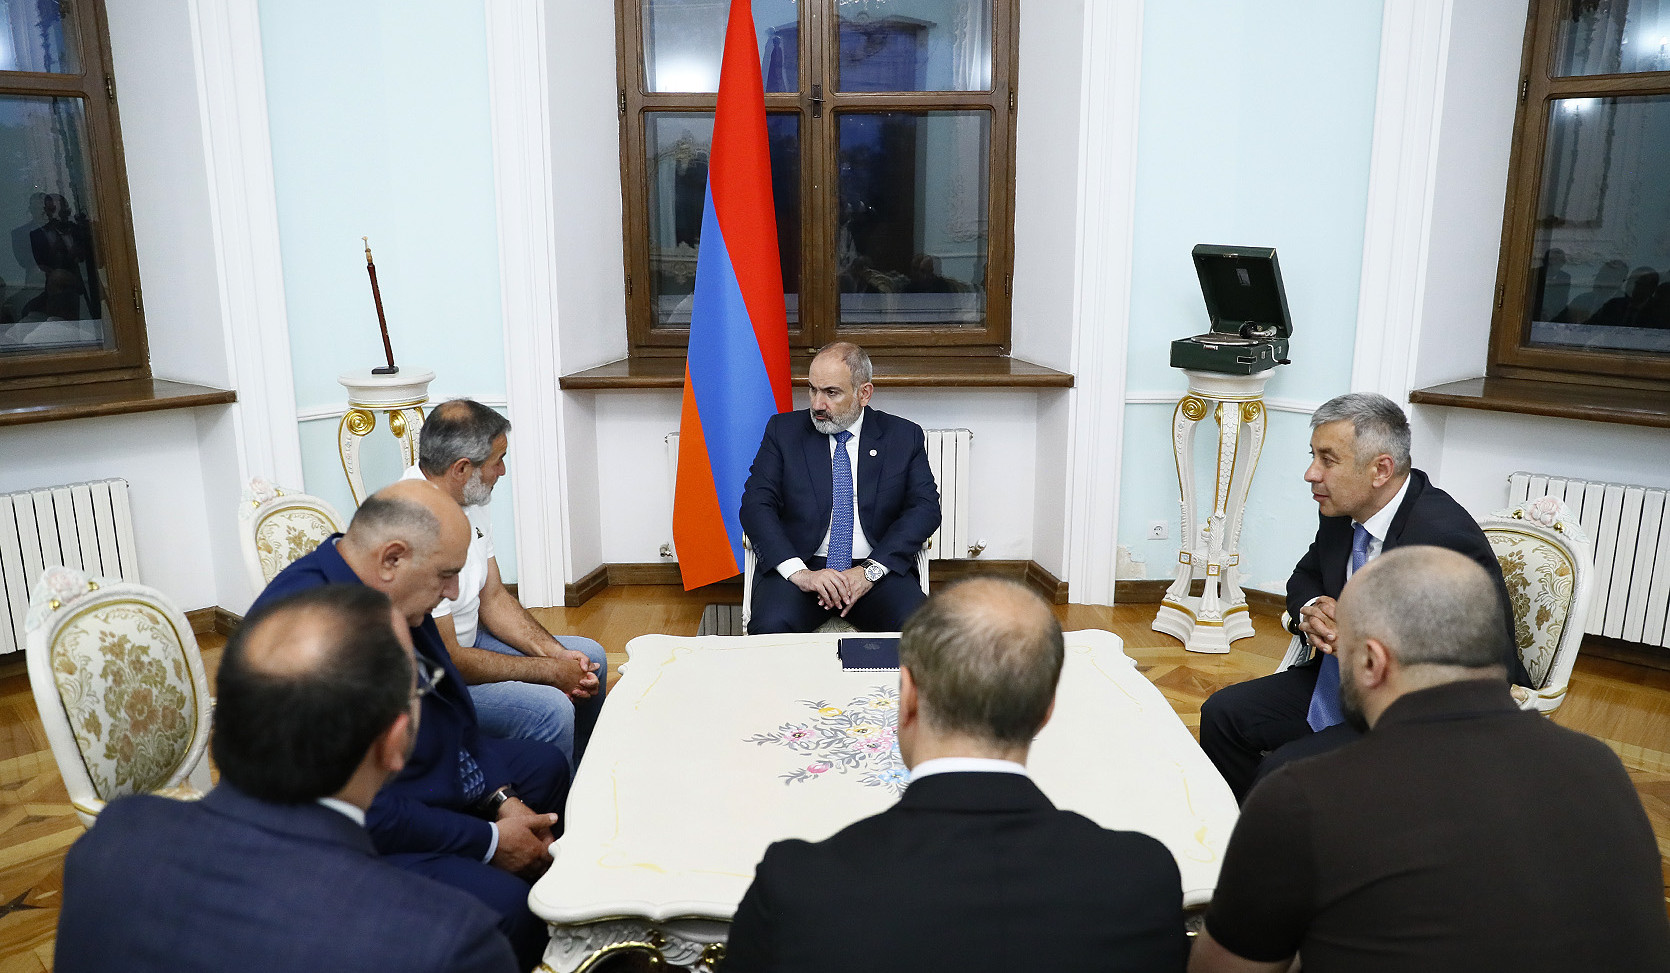 Prime Minister had meetings with representatives of Armenian community of Moldova and group of Ukrainian-Armenian businessmen